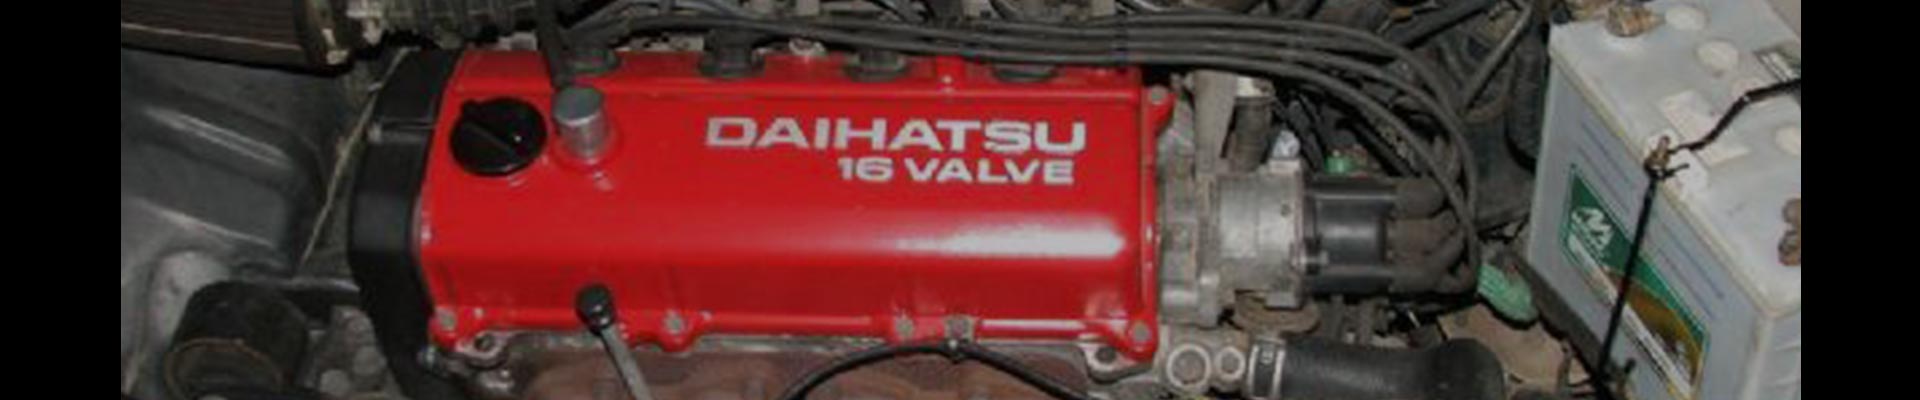 Shop Replacement Daihatsu Rocky Parts with Discounted Price on the Net